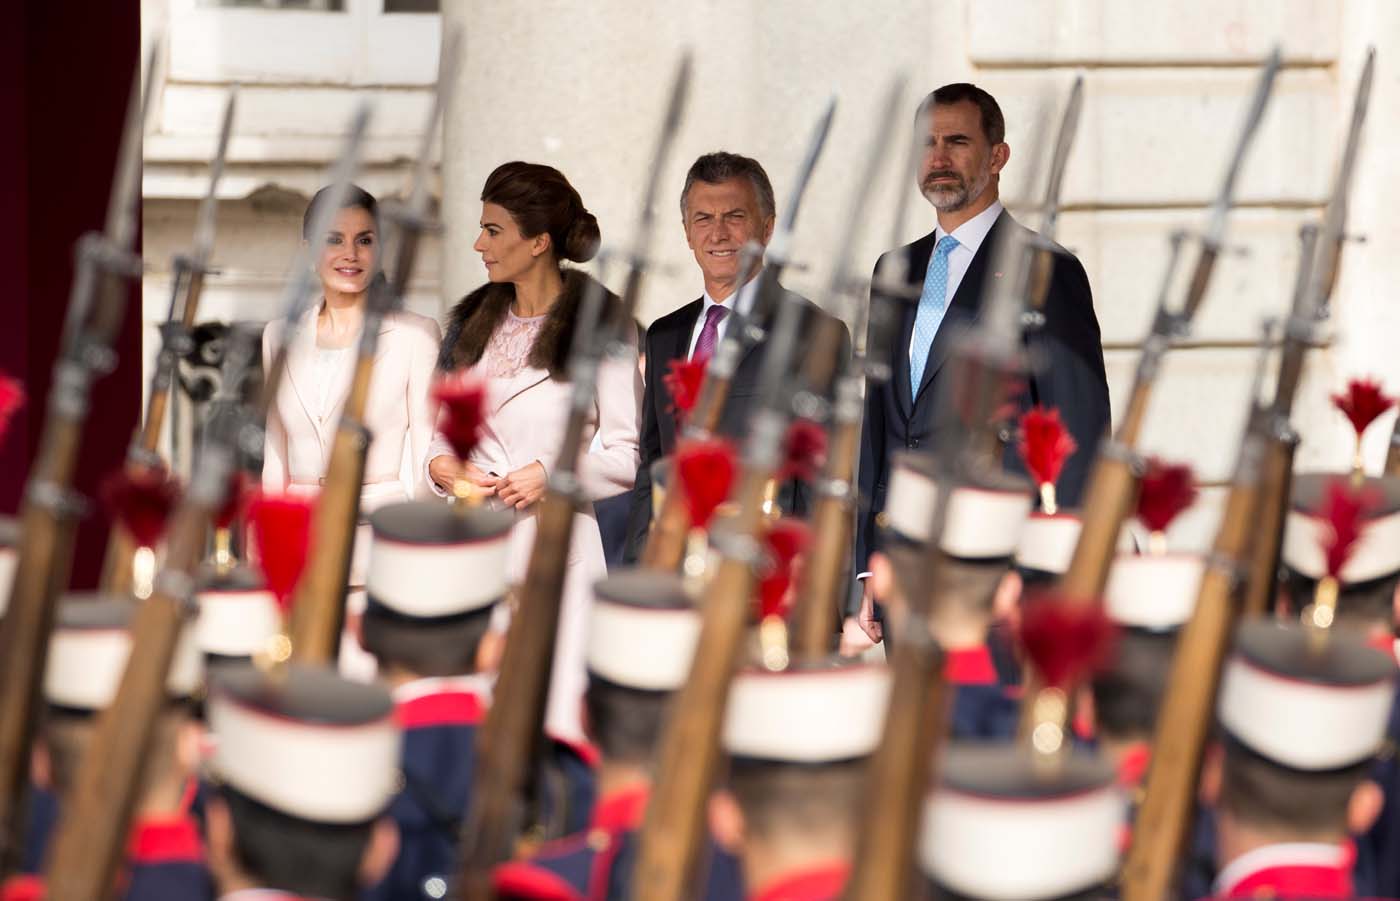 Spain's Queen Letizia, Argentina's first lady Juliana Awada, Argentina's President Mauricio Macri and Spain's King Felipe (L-R) attend a military parade during the welcoming ceremony at Royal Palace in Madrid, Spain February 22, 2017. REUTERS/Sergio Perez